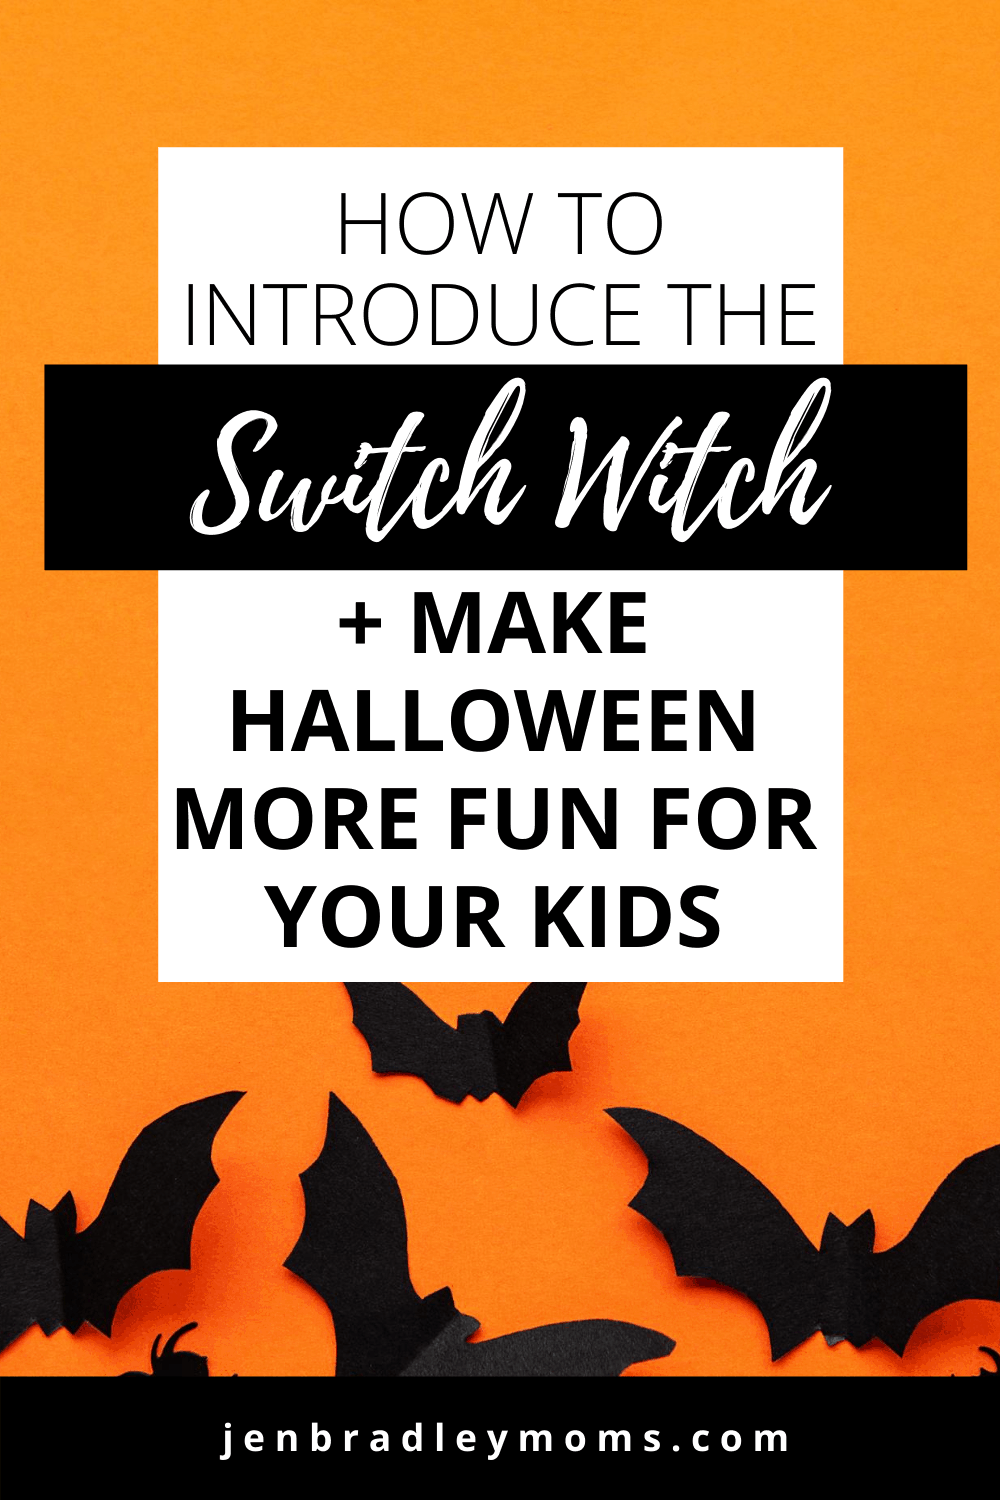 The Switch Witch: Why We Love Her (How She Makes Halloween More Fun!)